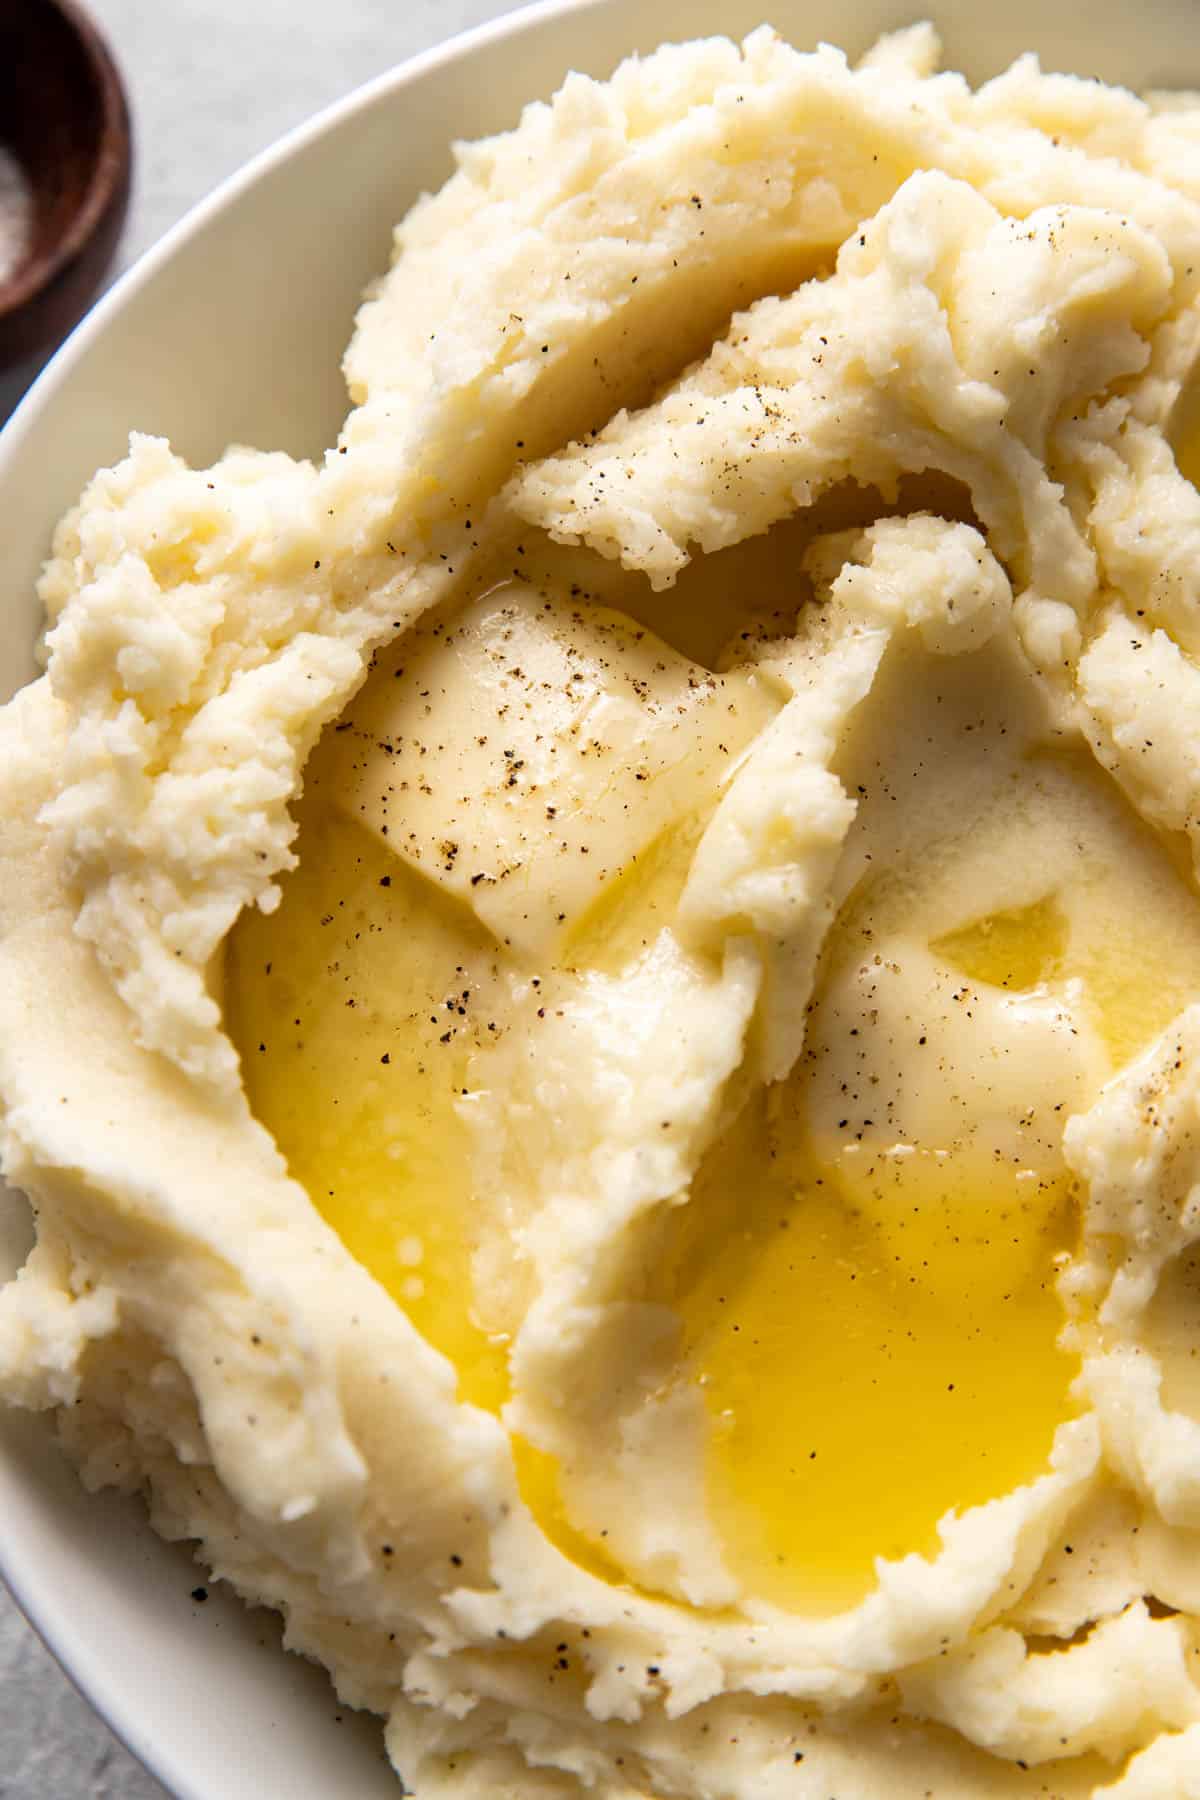 mashed potatoes in a bowl.